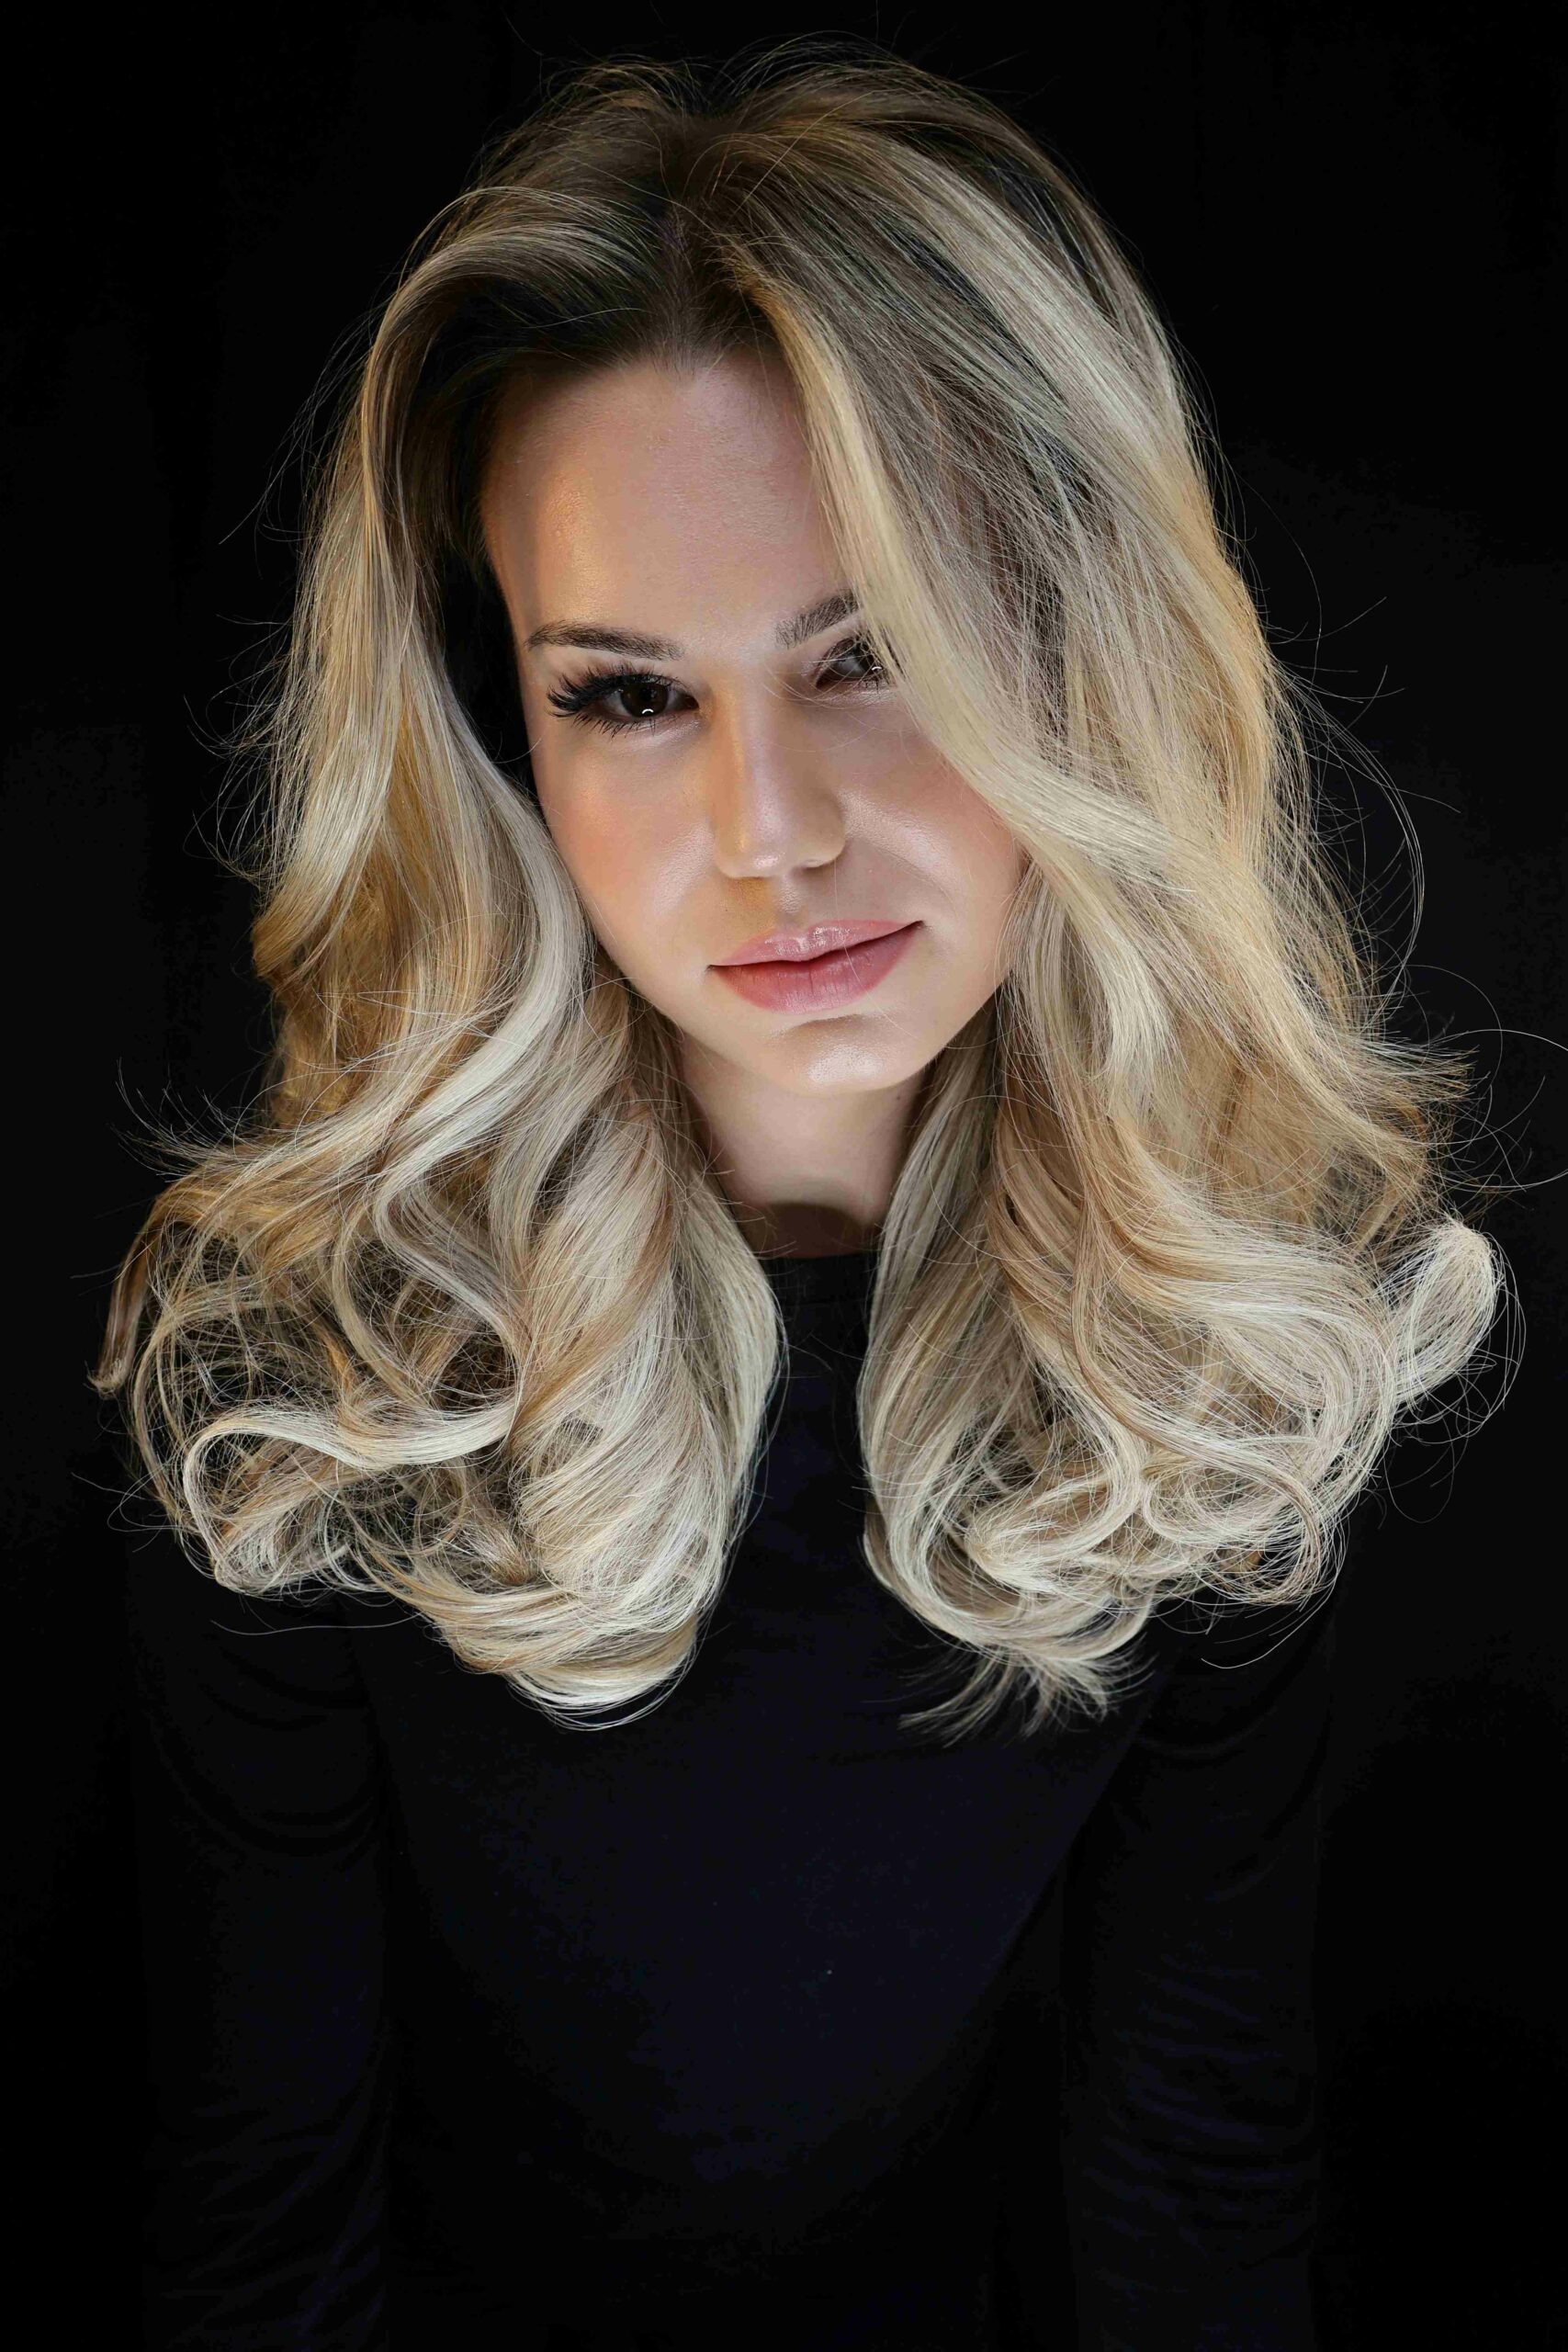 Make every strand count with Micro Bead Single Strand Remy Human Hair Extensions. LOX Professional hair extensions have a fast application and are safe to apply onto natural hair. Find a salon near you or learn how to become certified at www.loxhairextensions.com.